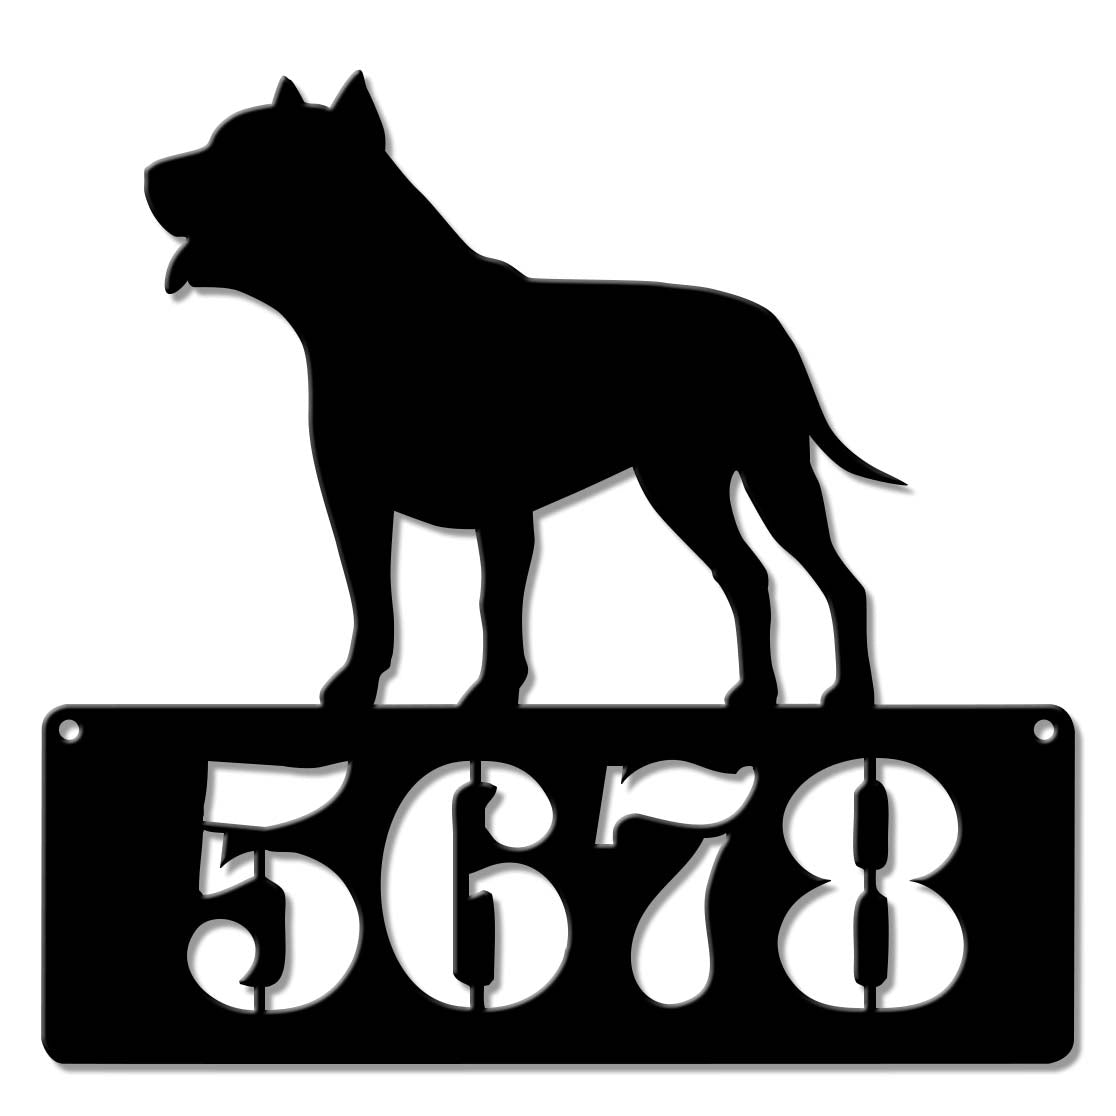 Pit Bull Address Sign  - Personalized